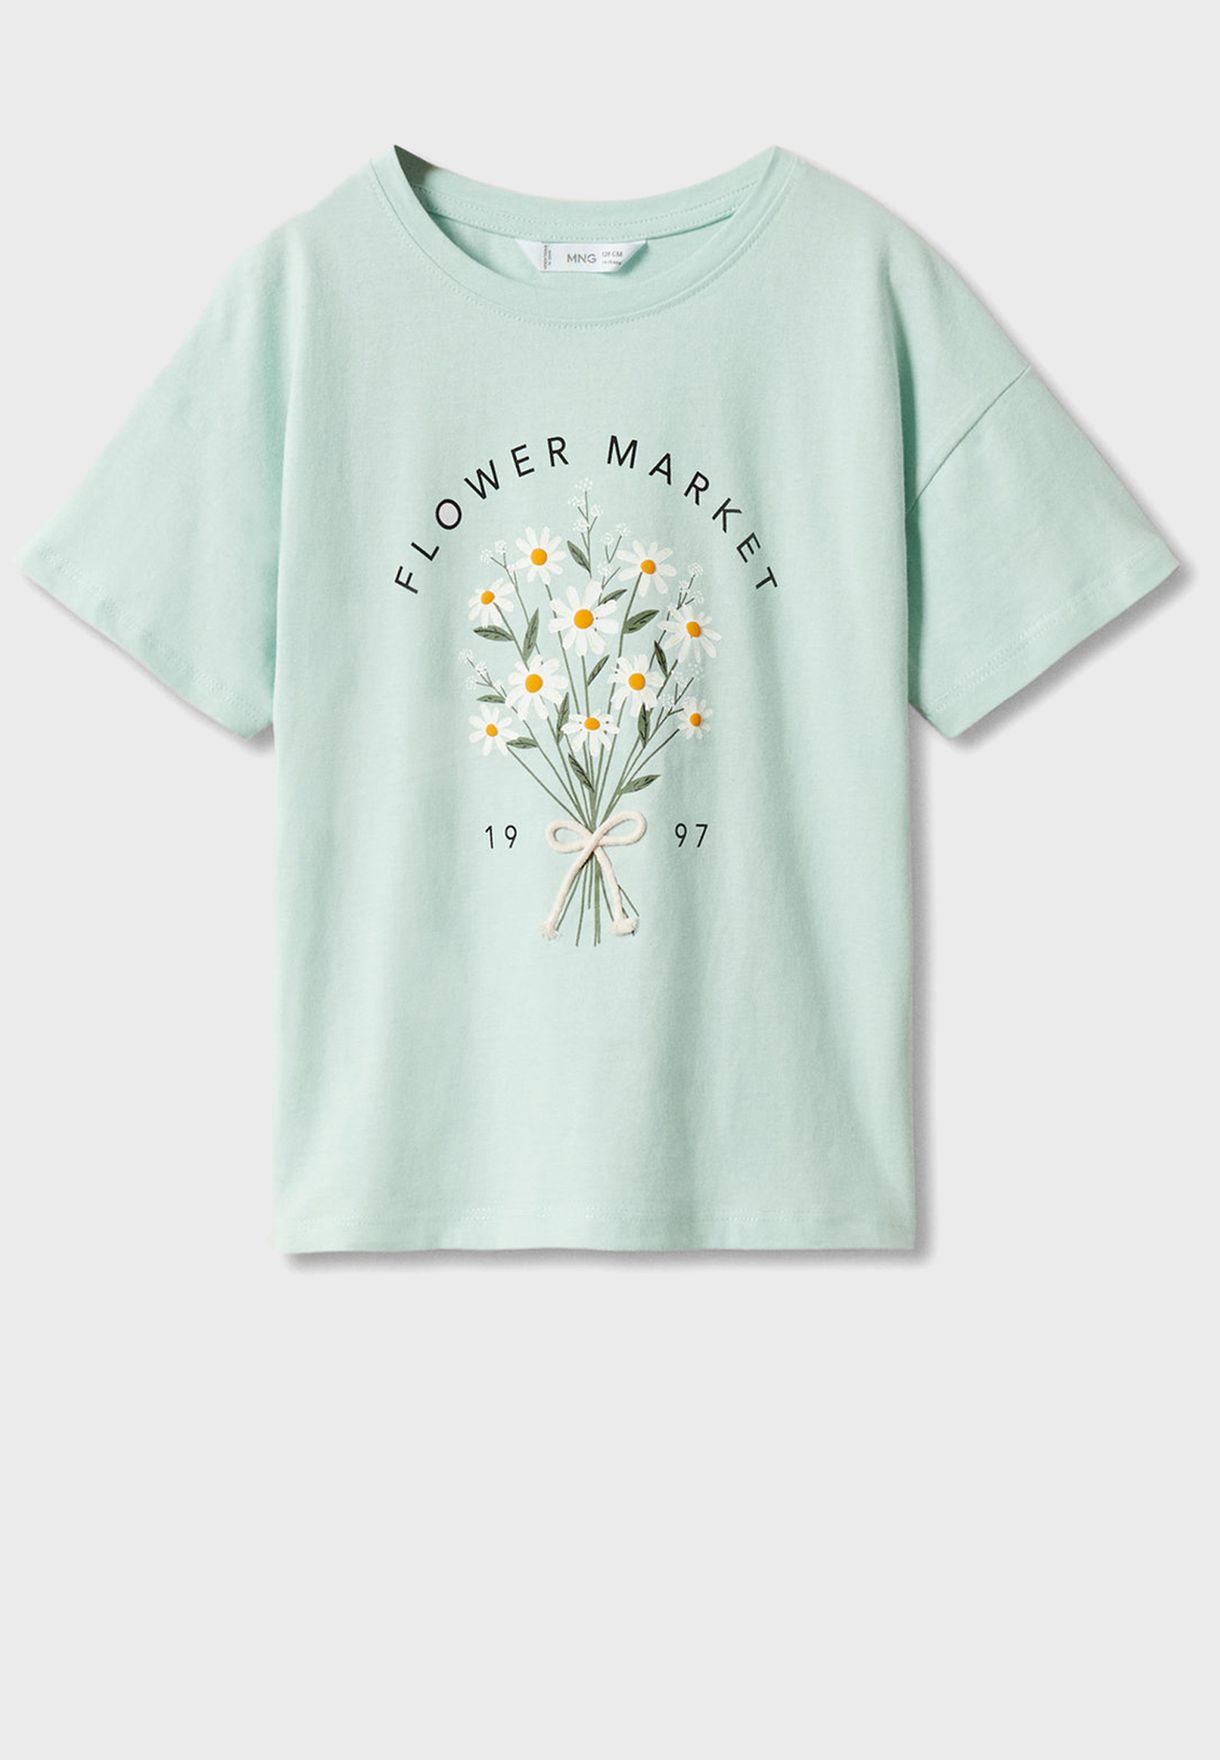 Green Floral Youth Unisex T-shirt